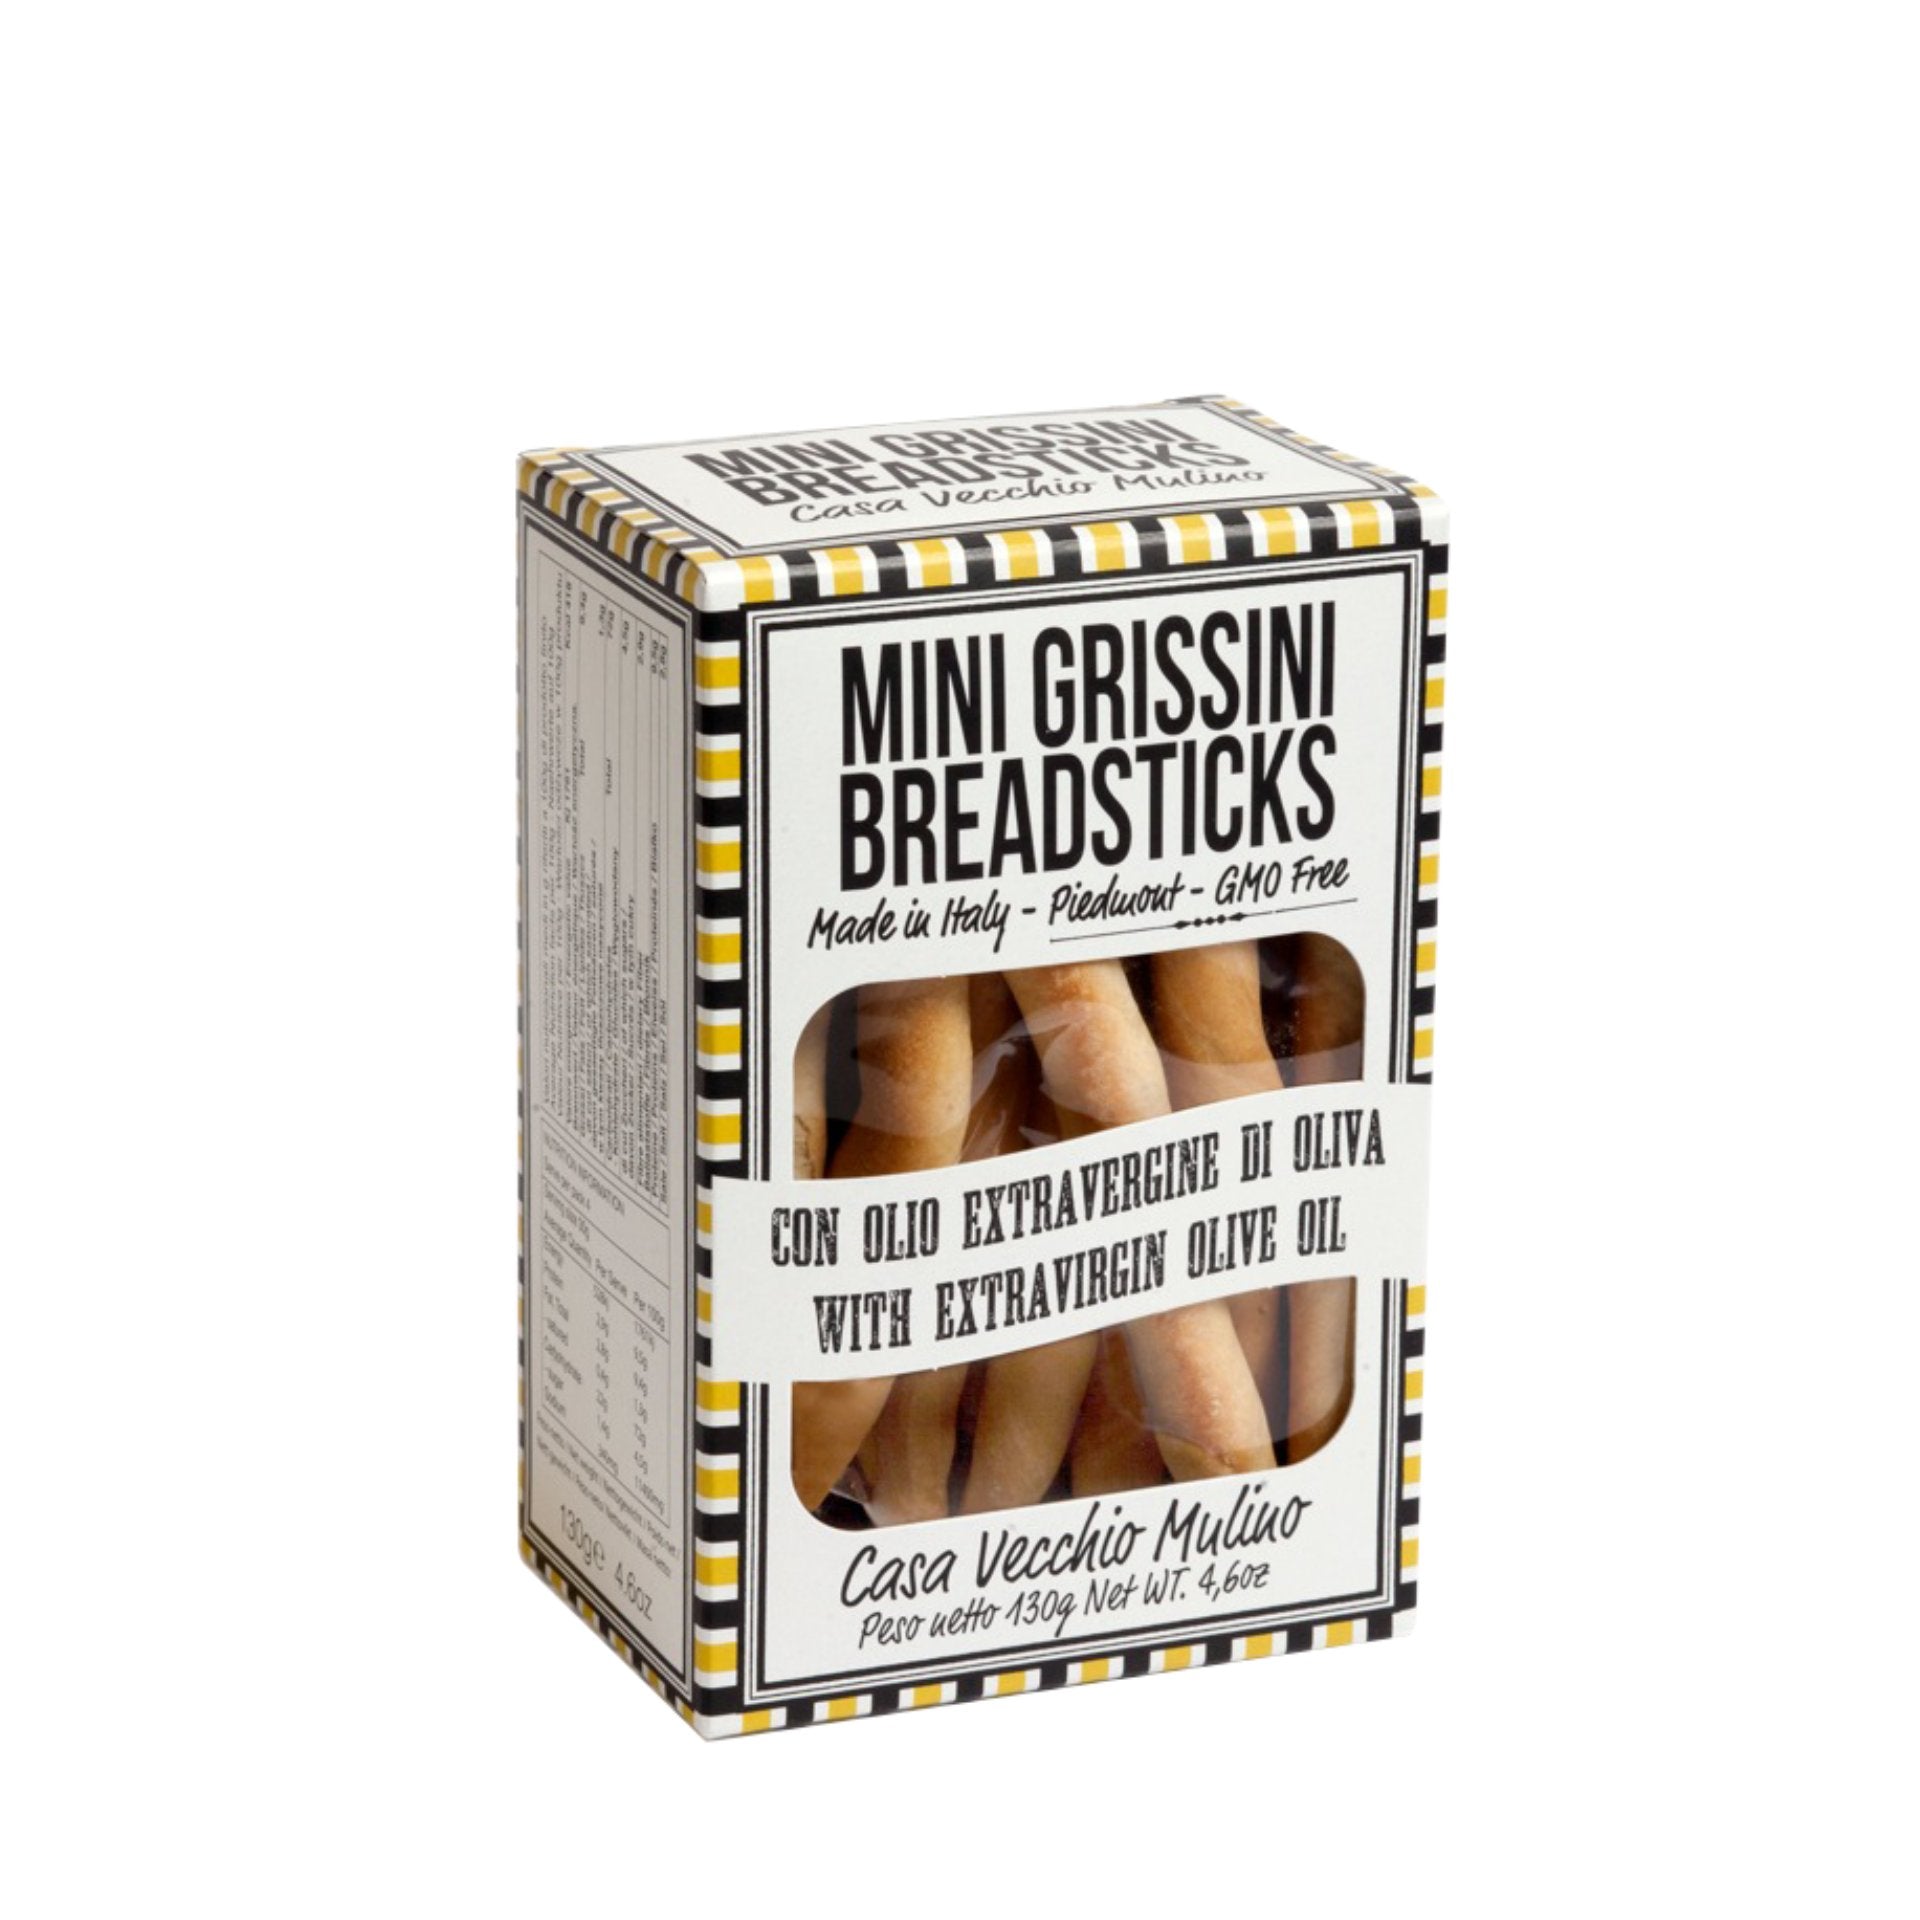 Casa Vecchio Mulino Mini Grissini with Olive Oil 130g  | Imported and distributed in the UK by Just Gourmet Foods